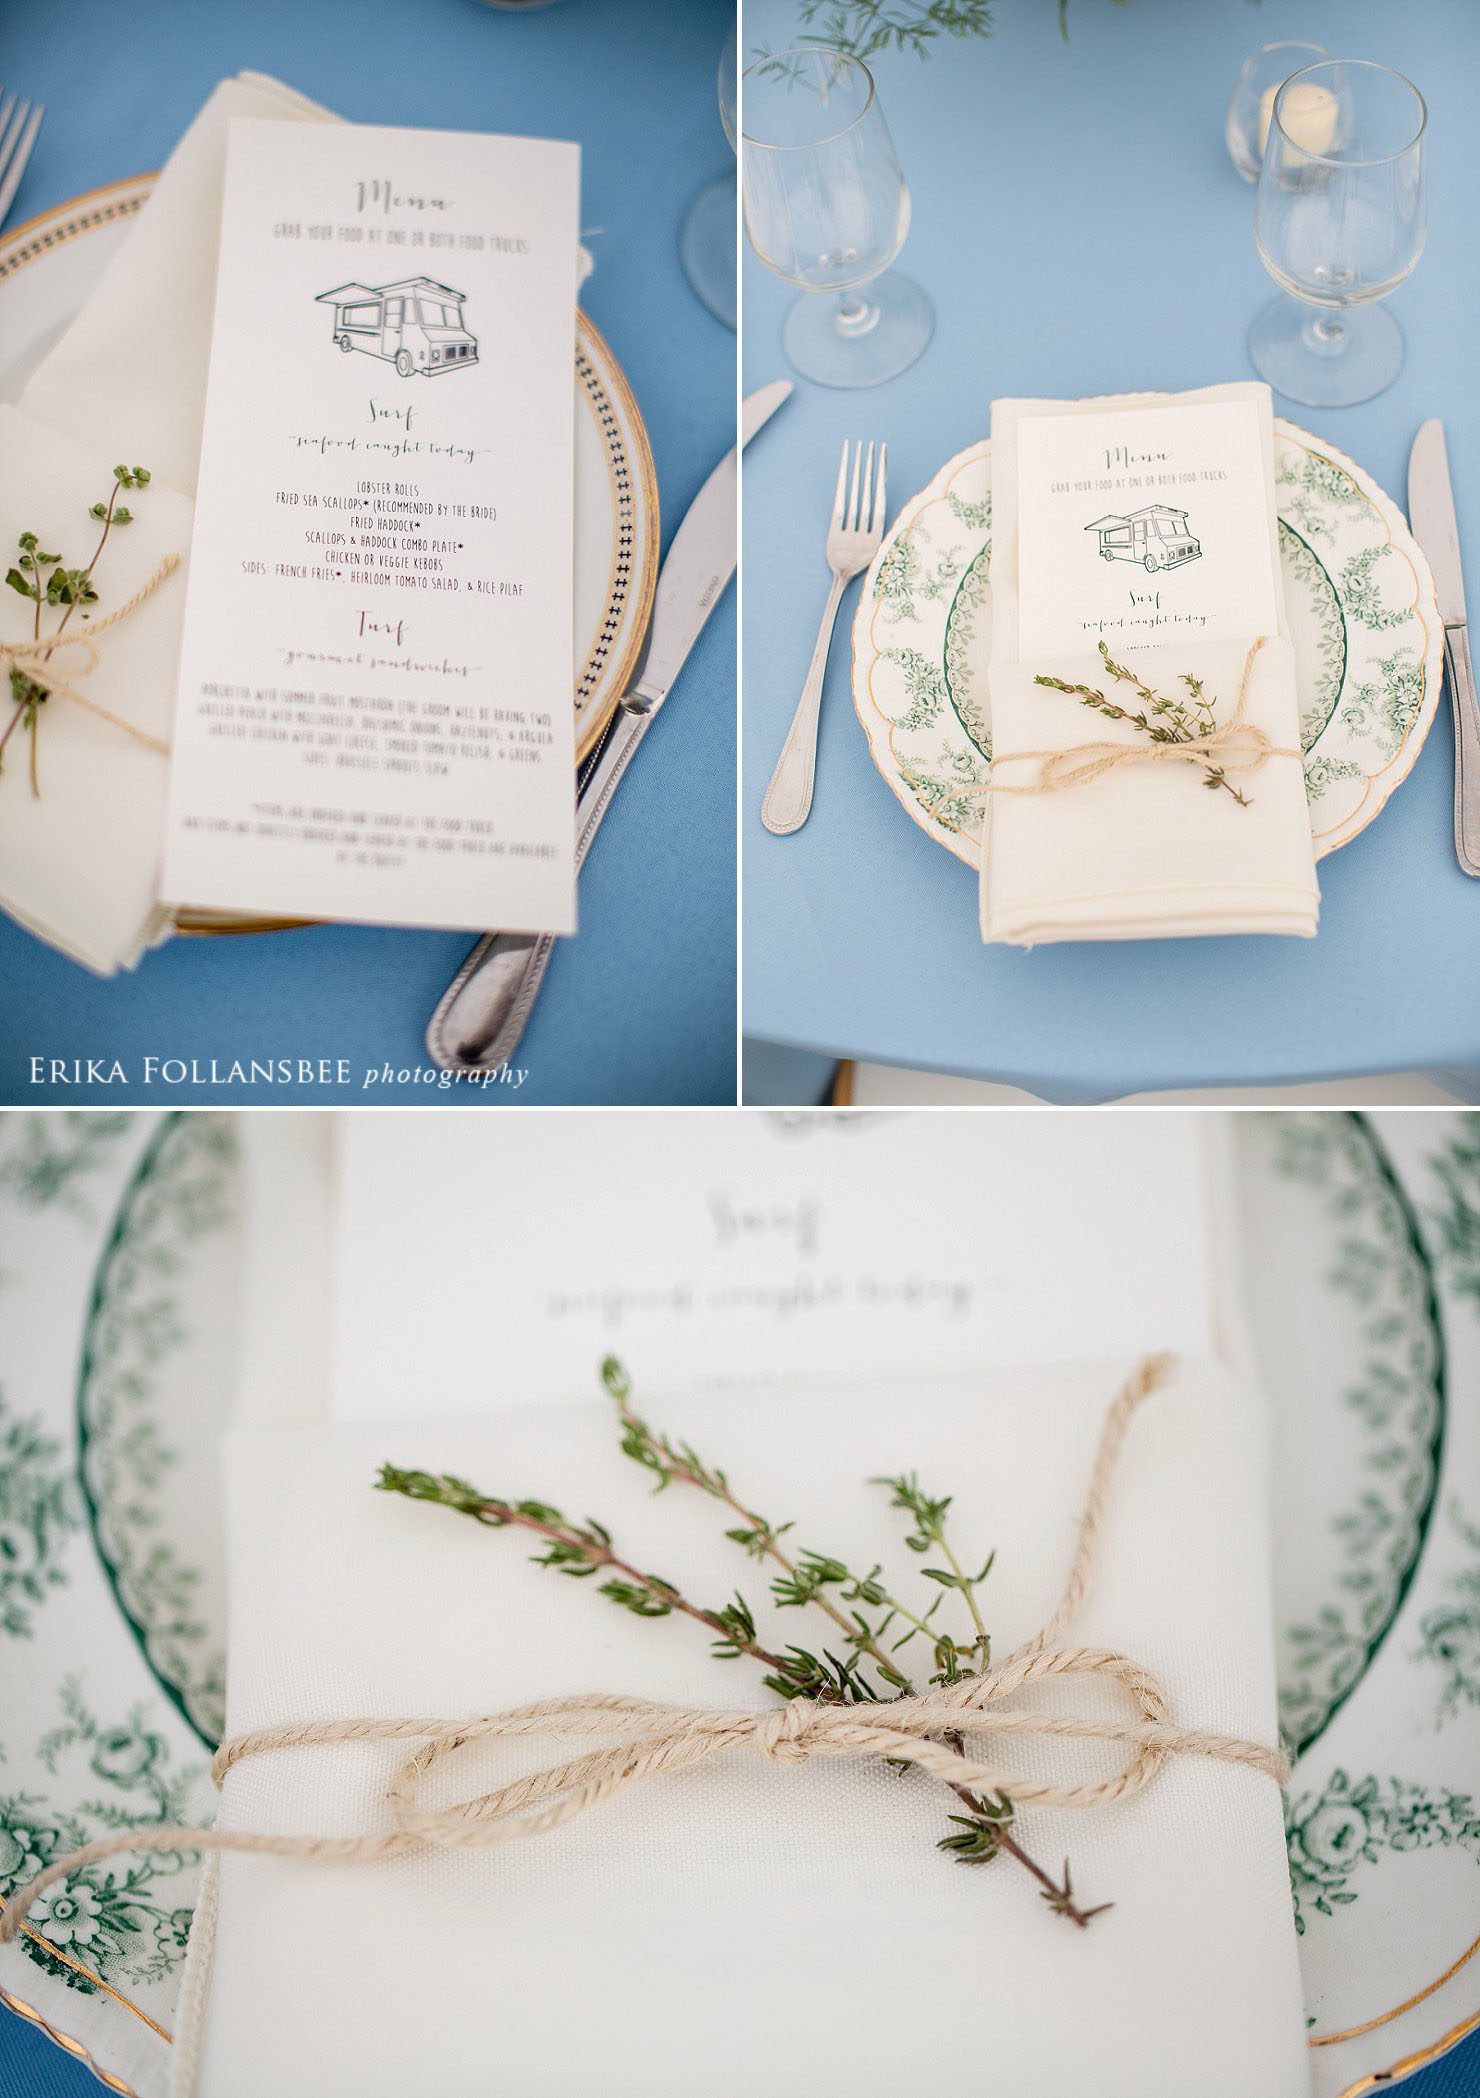 wedding food truck menu tucked into napkin tied with twine and a sprig of thyme